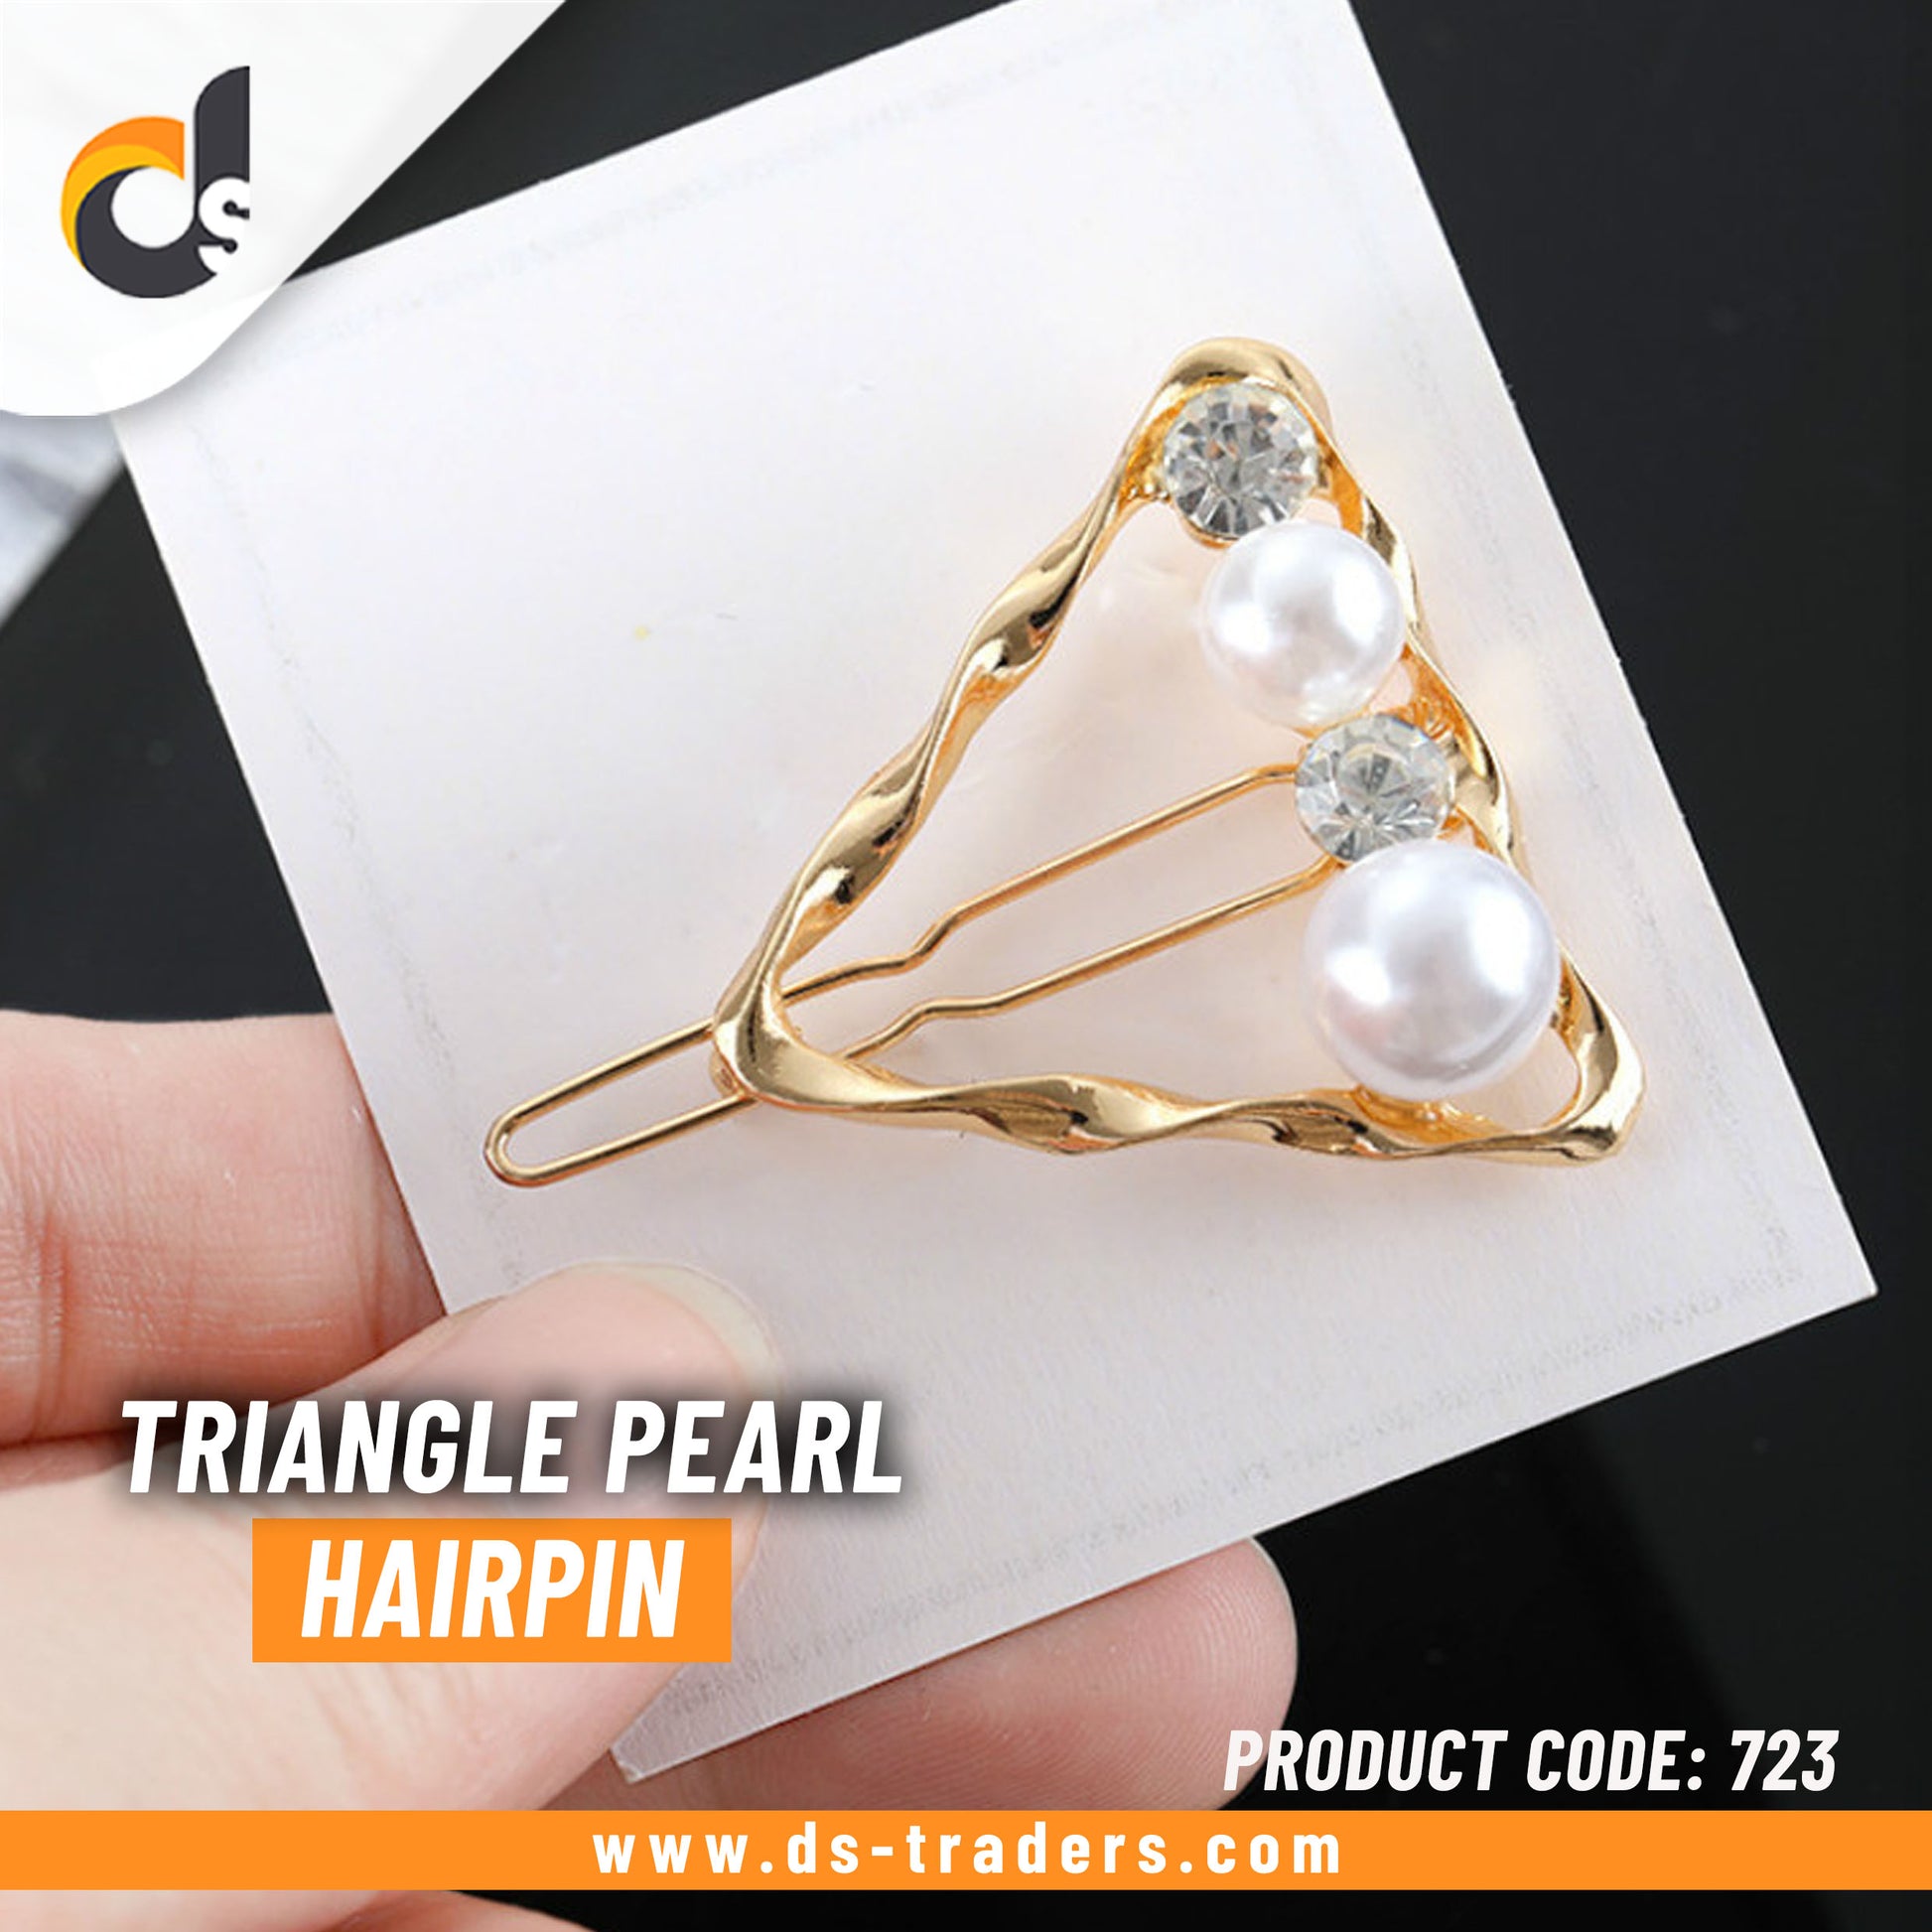 Triangle Diamond & Pearl Hairpin - DS Traders